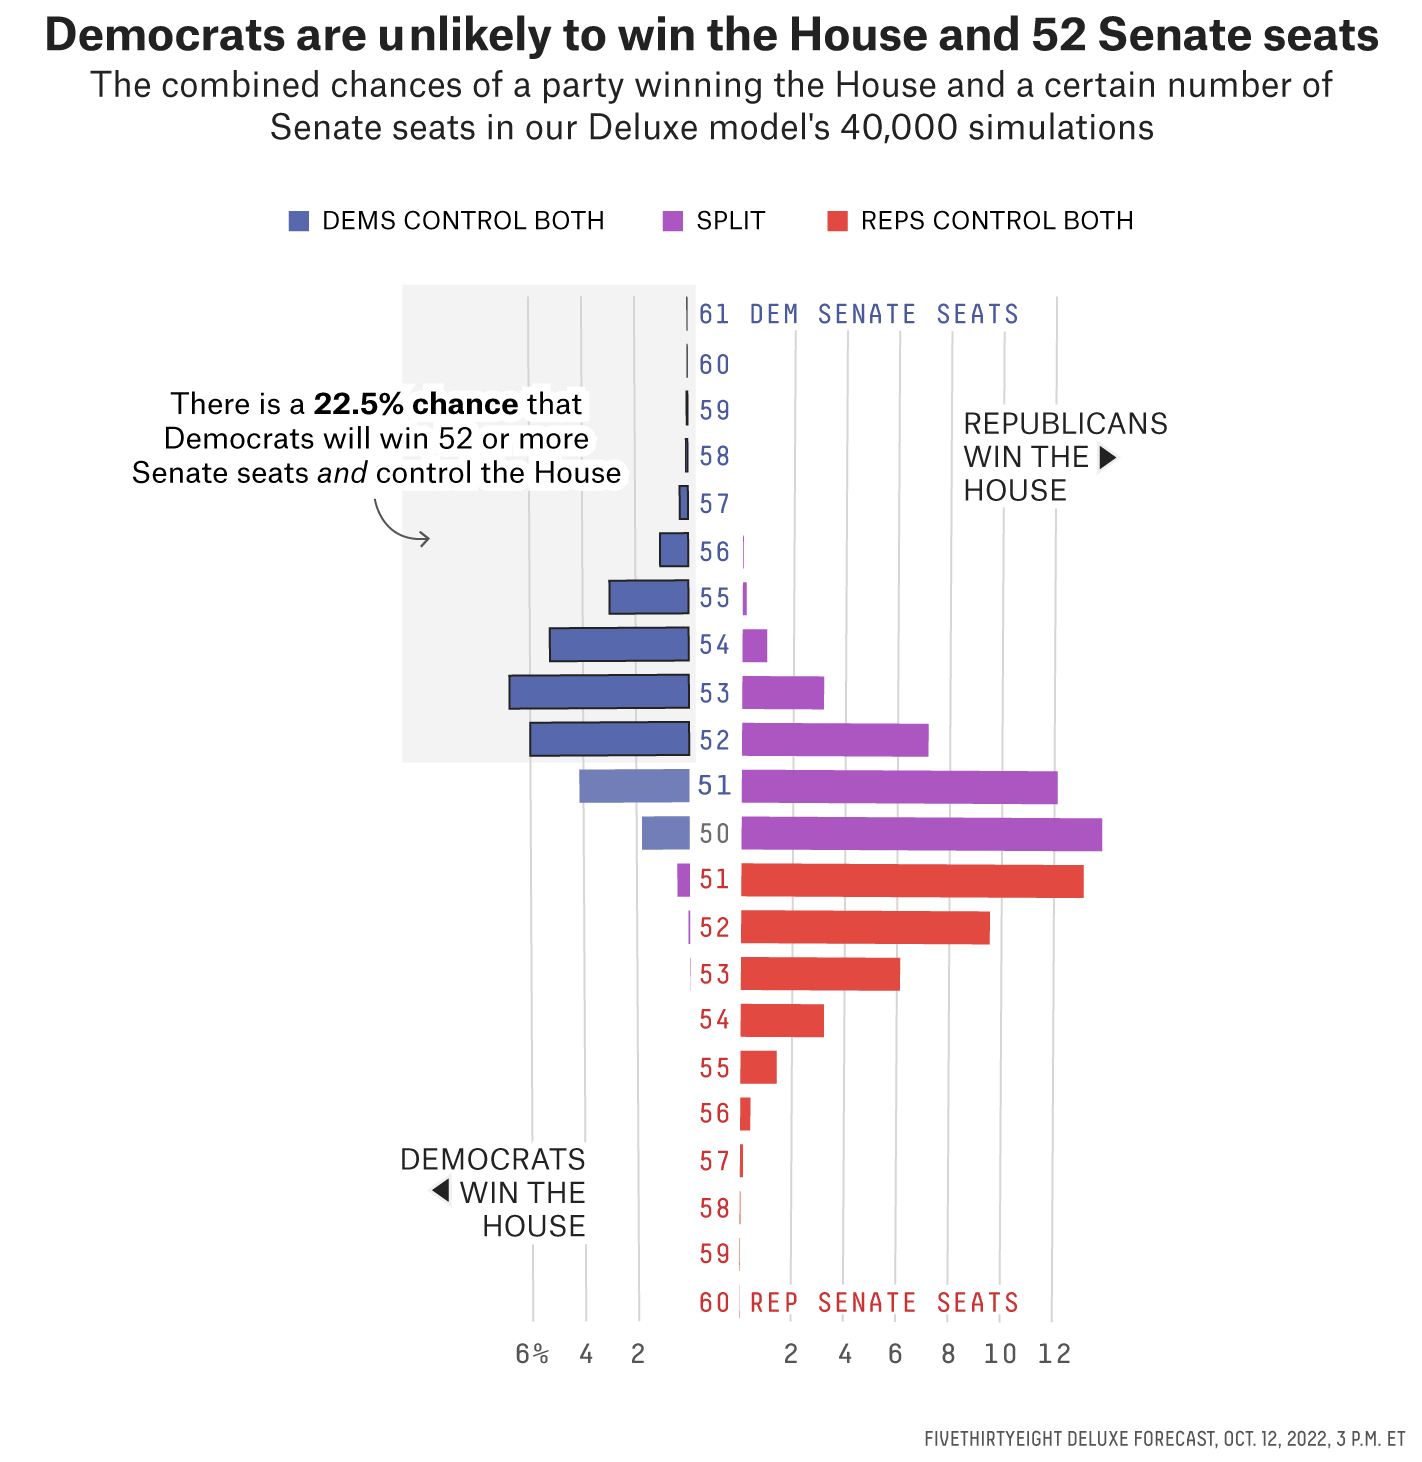 A vertical bar chart shows the combined chances Democrats have of keeping the House and wining 52 Senate seats. The greatest probabilities are Republicans win the House, but Democrats retain the Senate, causing split control. 